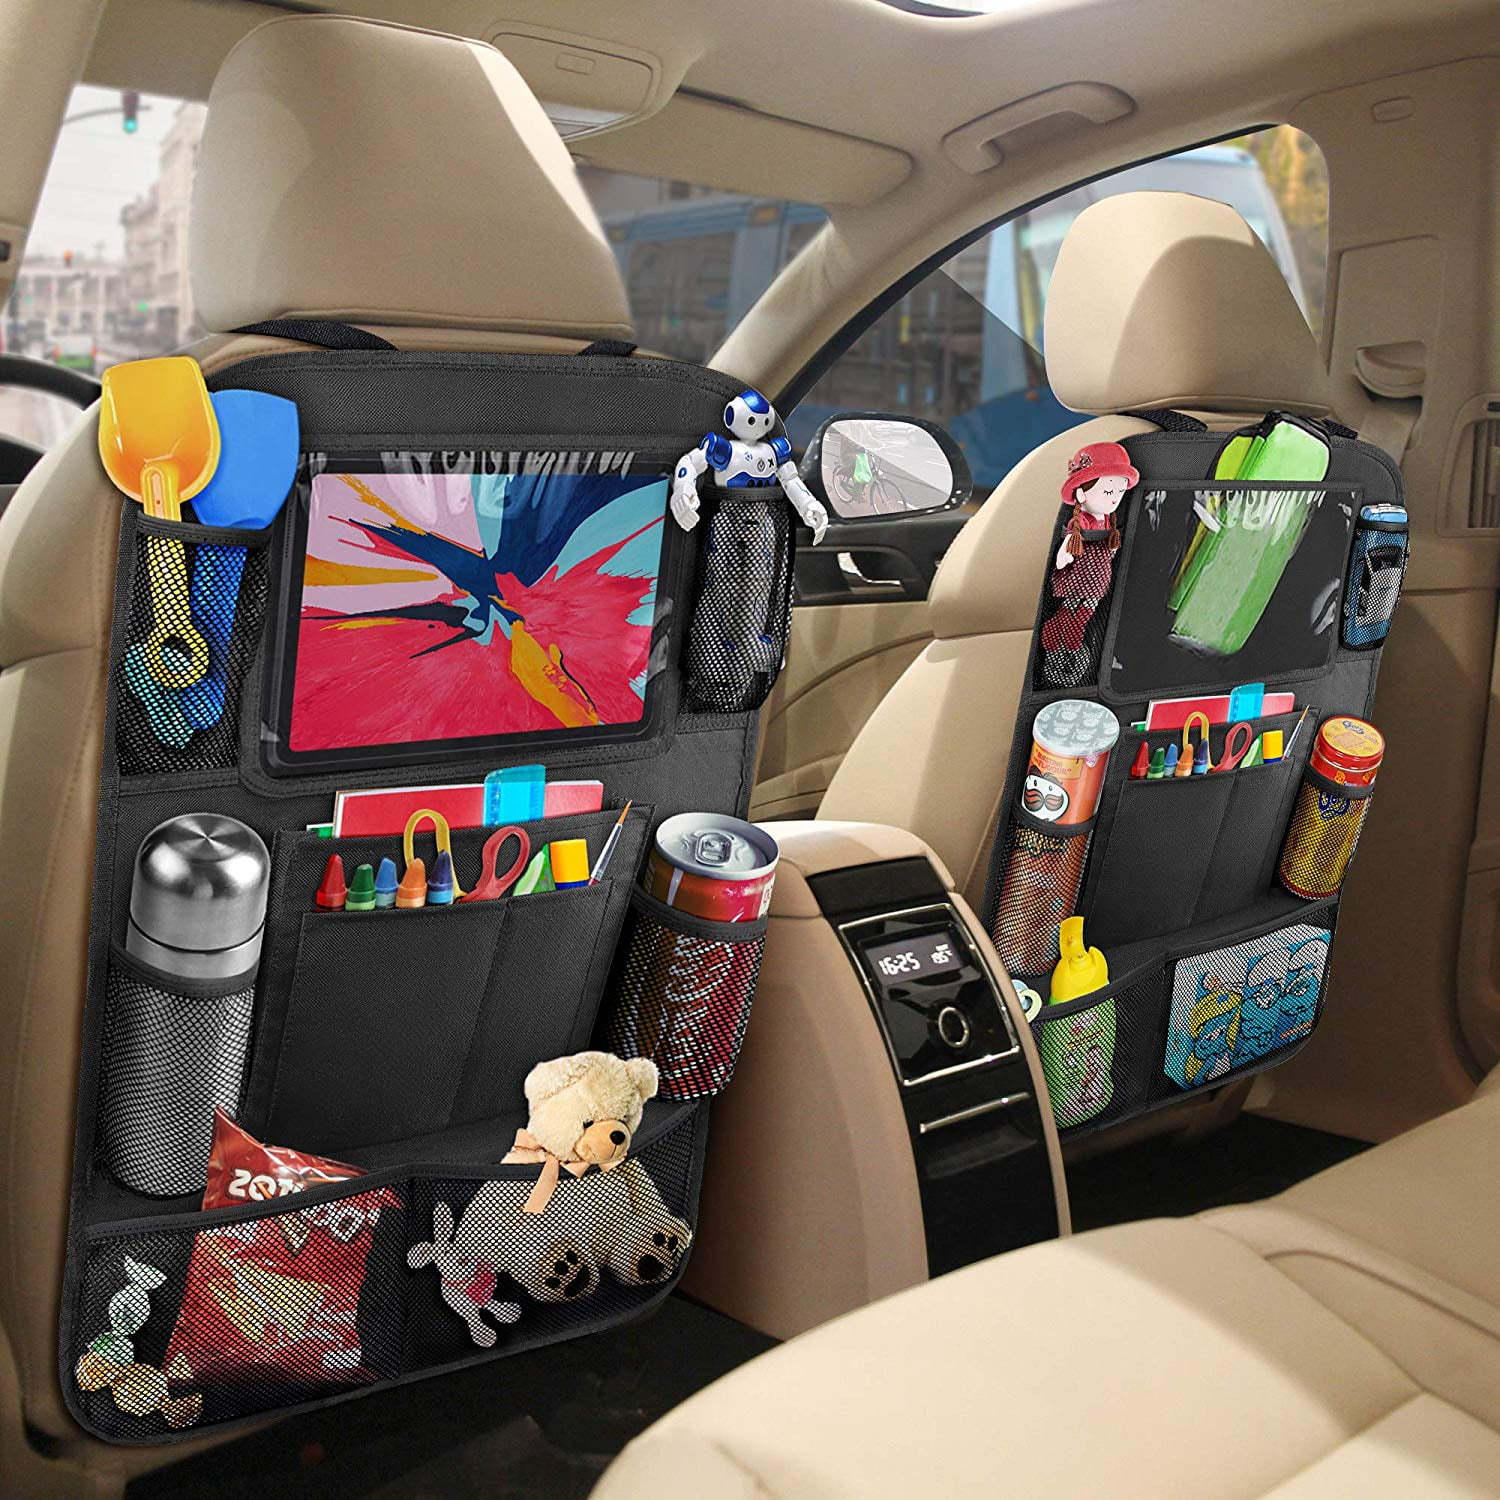 Car Back Seat Organizer With Phone Tablet Holder Touch Screen Pocket Storage Bag 